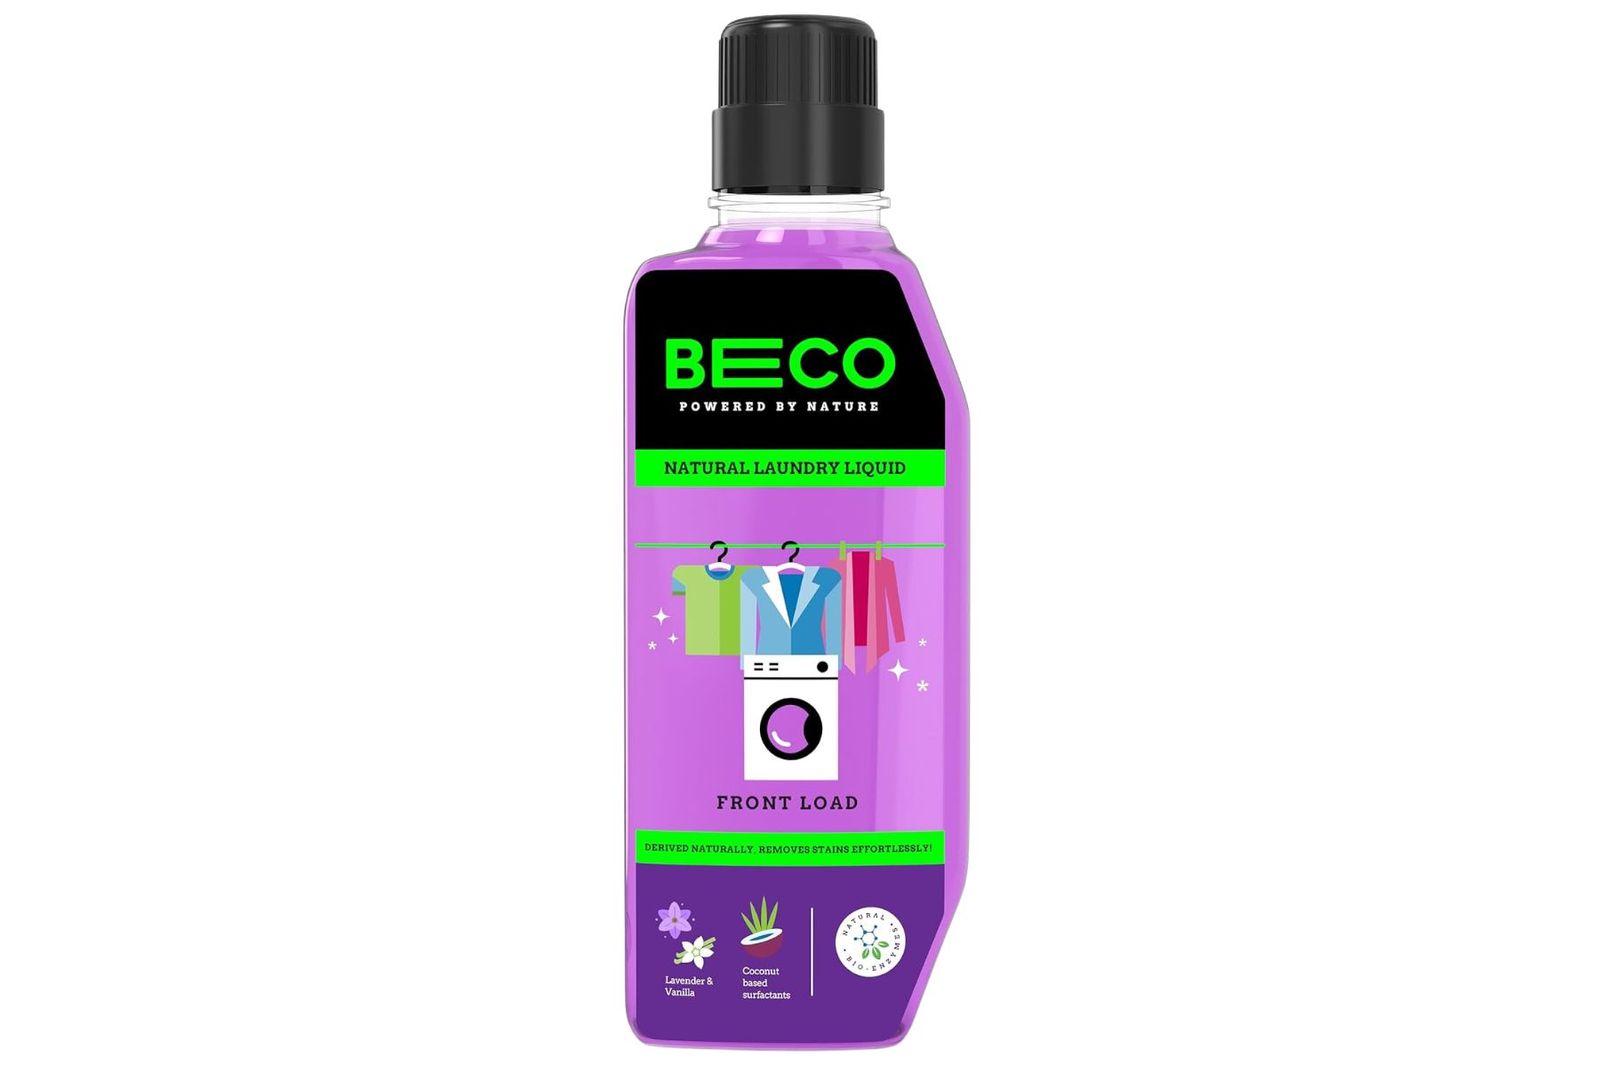 Beco Natural Laundary Liquid Front Load